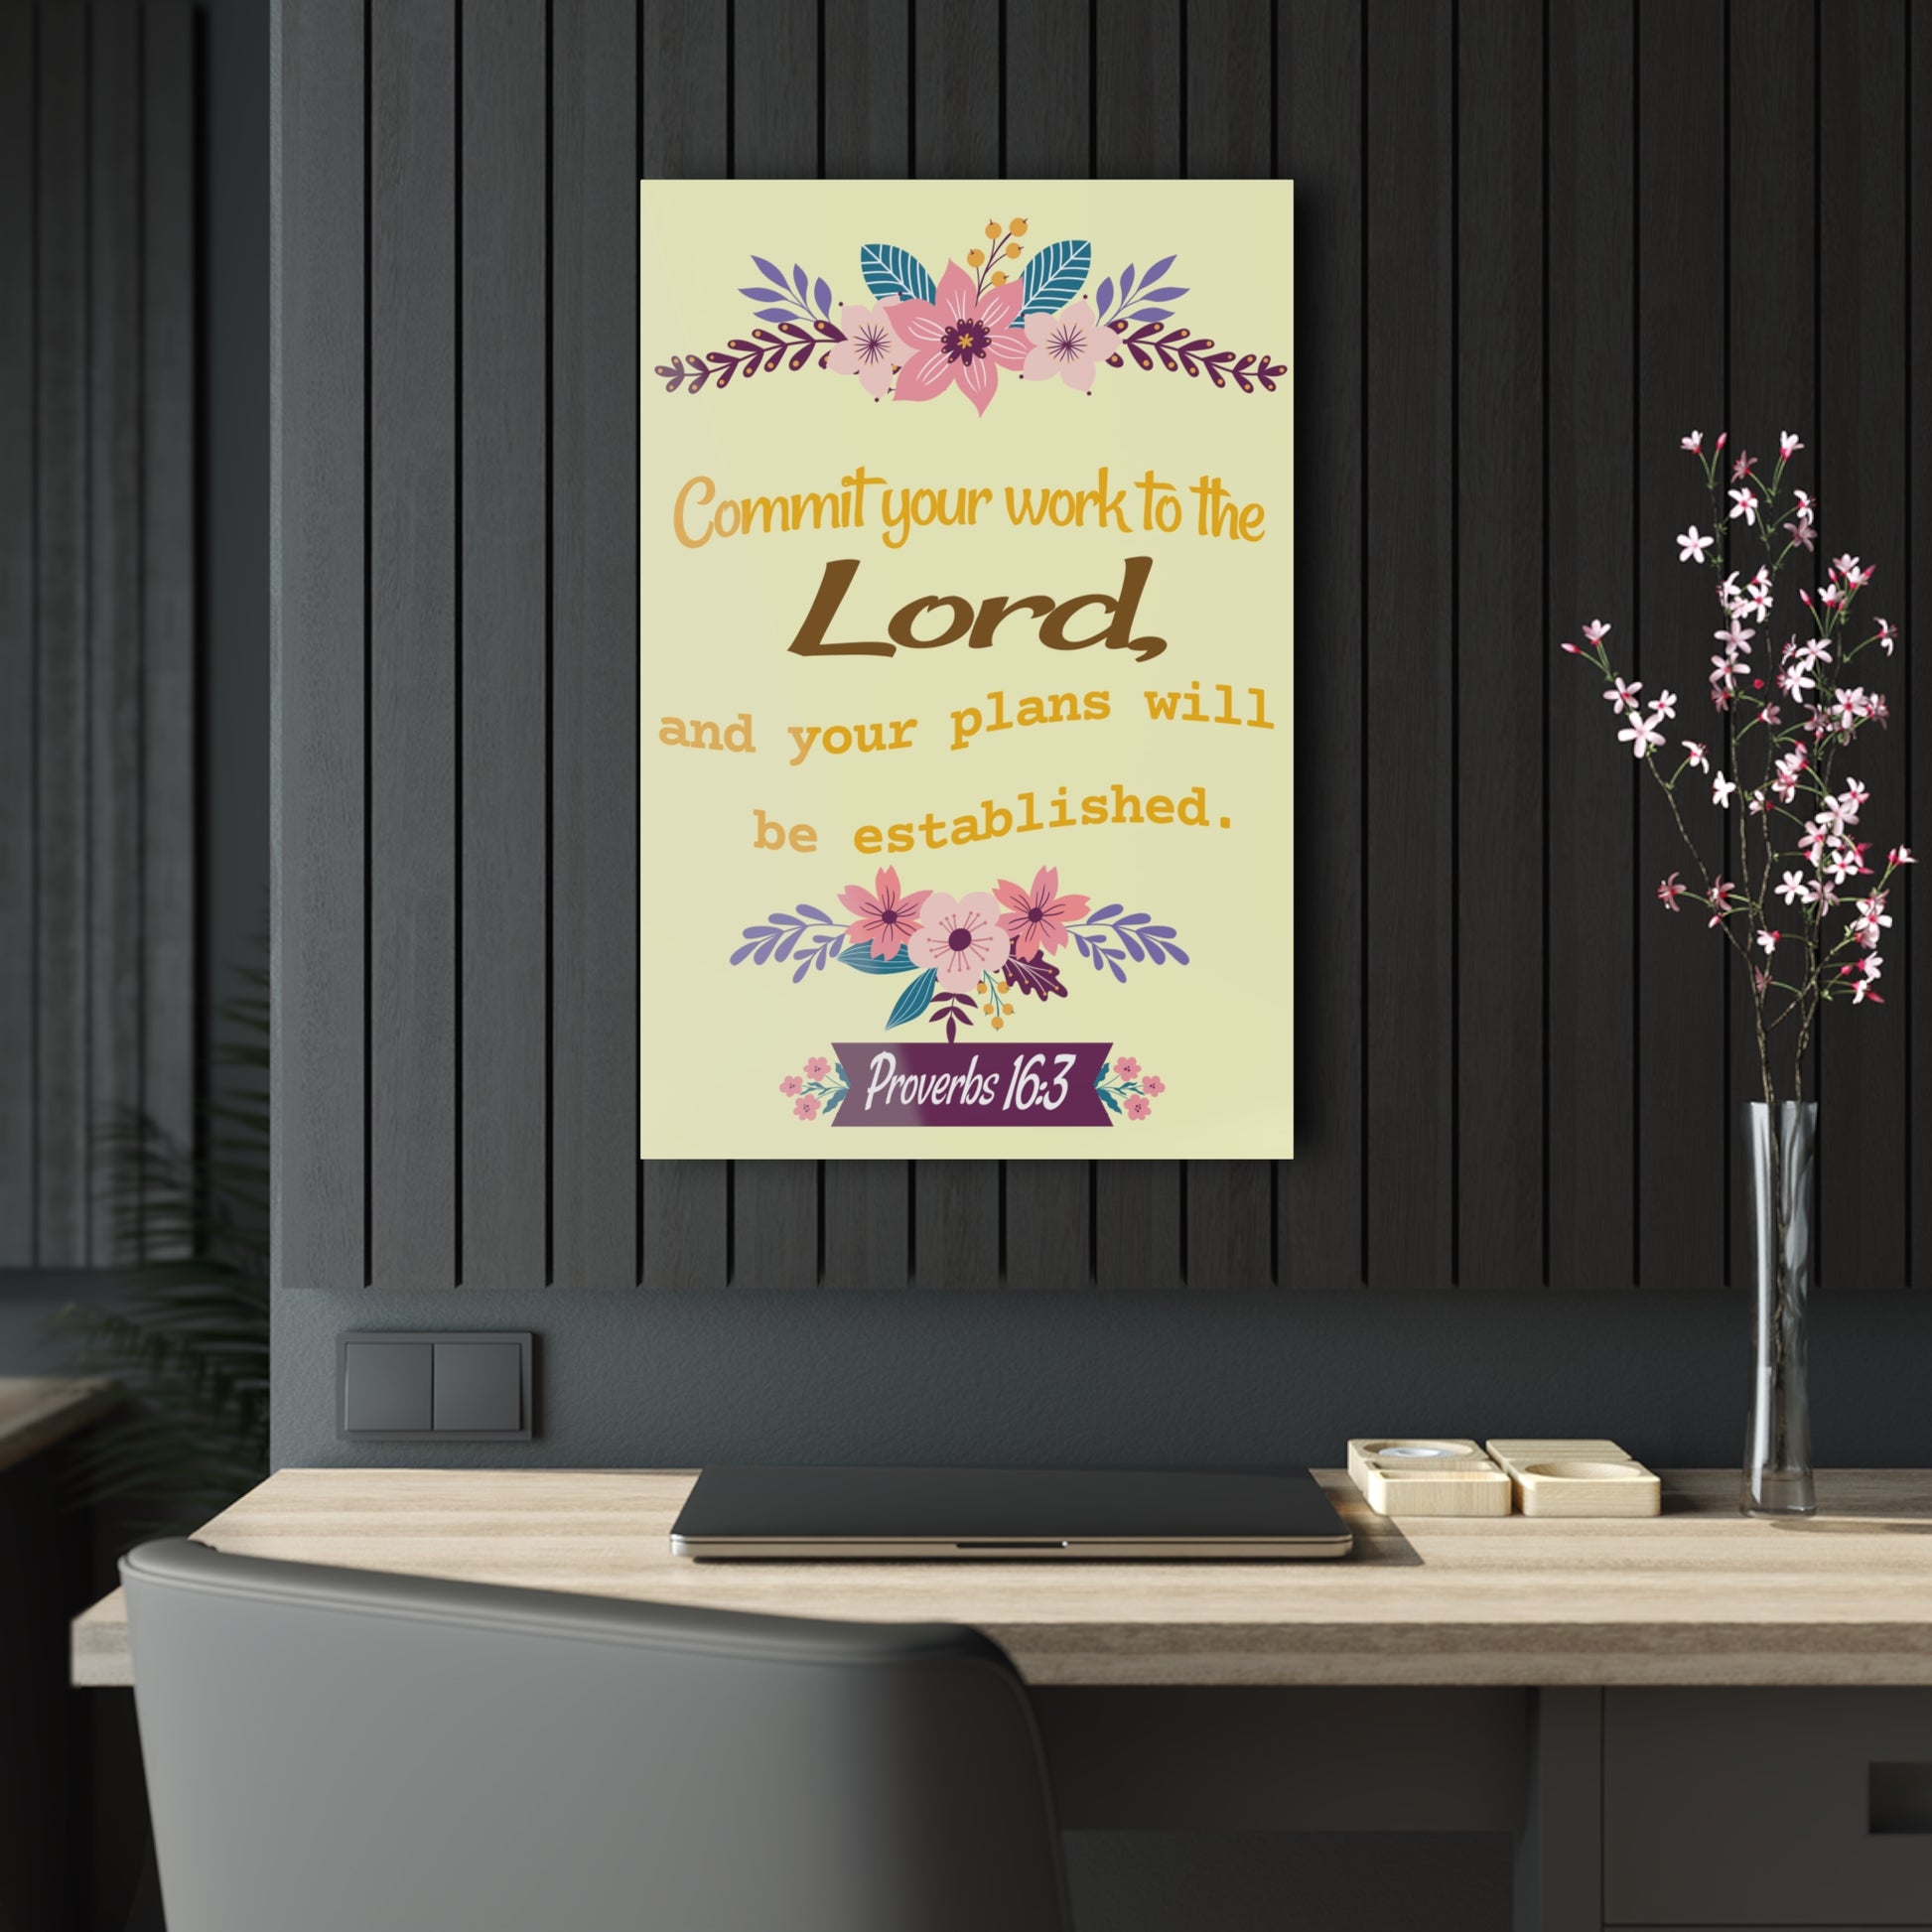 House Artwork - Acrylic Print with Inspirational Scripture | Art & Wall Decor,Assembled in the USA,Assembled in USA,Decor,Home & Living,Home Decor,Indoor,Made in the USA,Made in USA,Poster